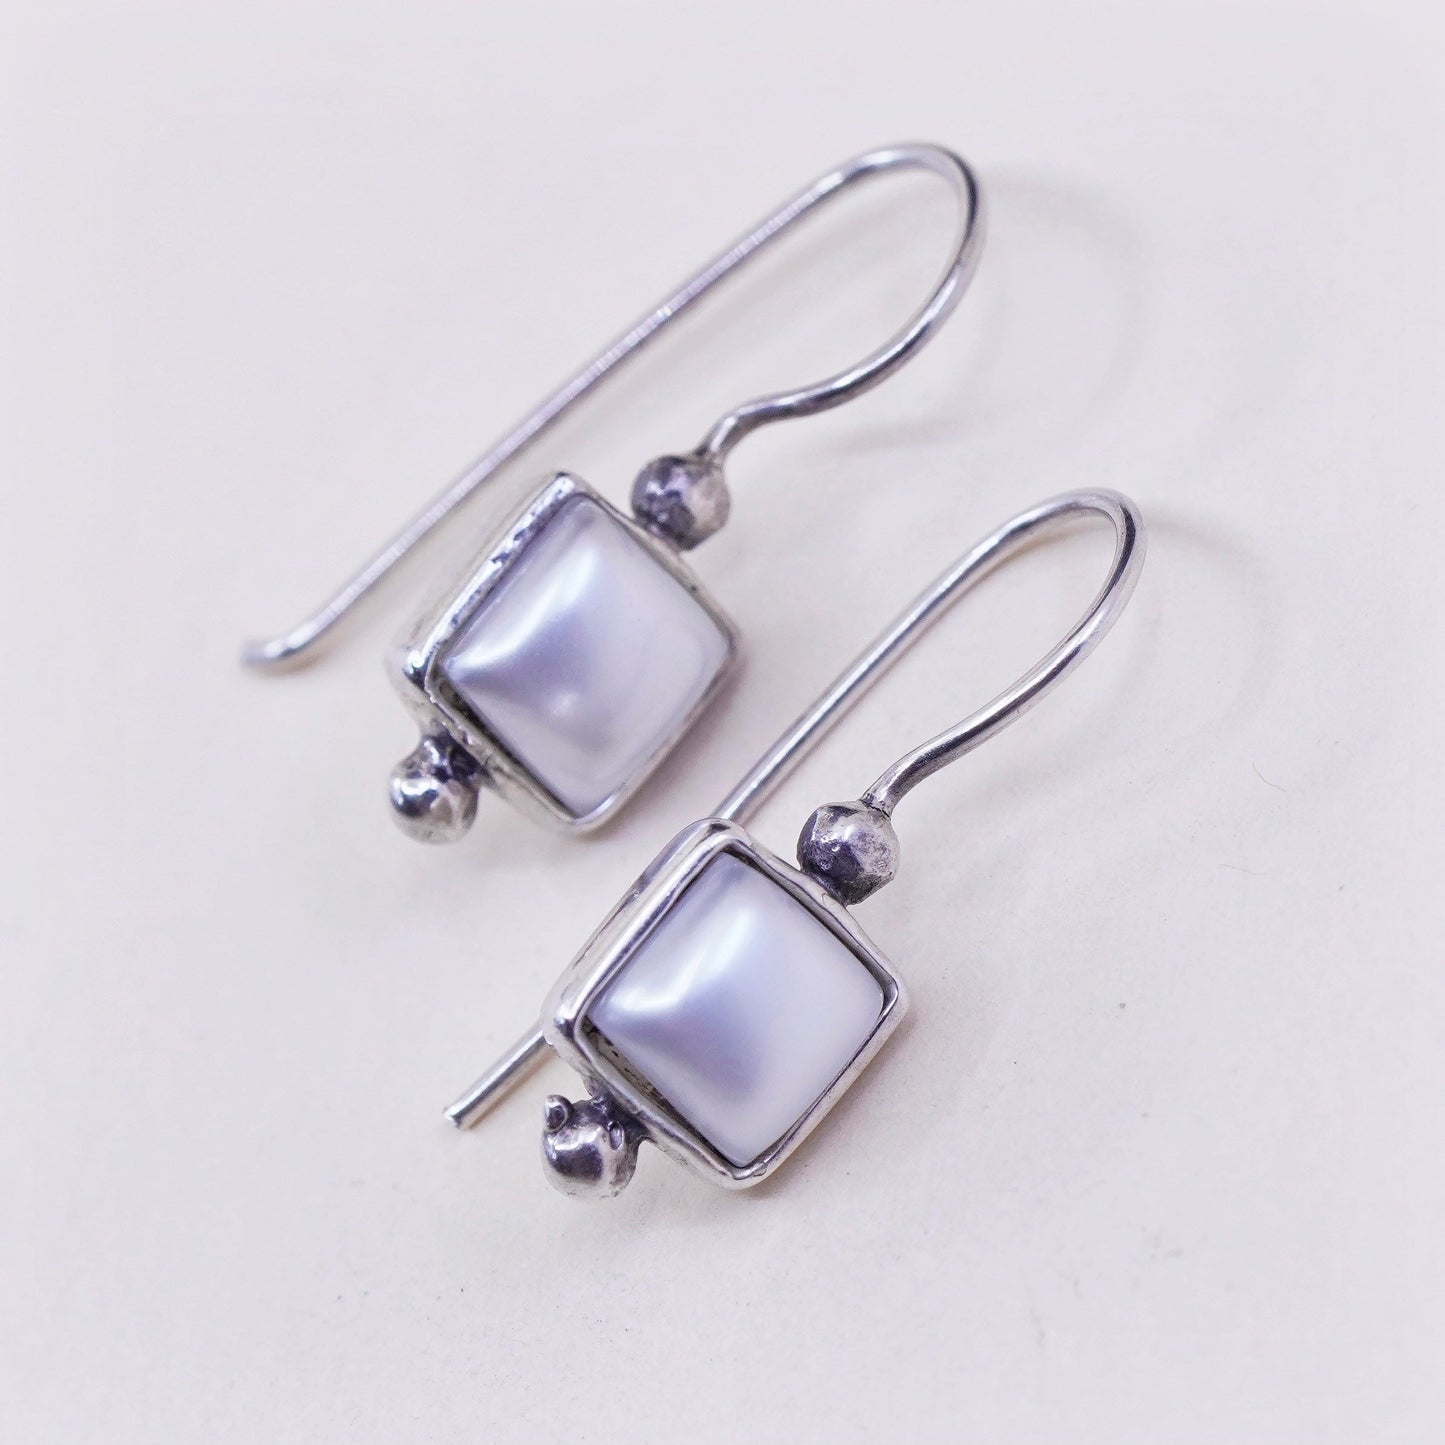 Vintage Sterling 925 silver handmade earrings with square pearl drops